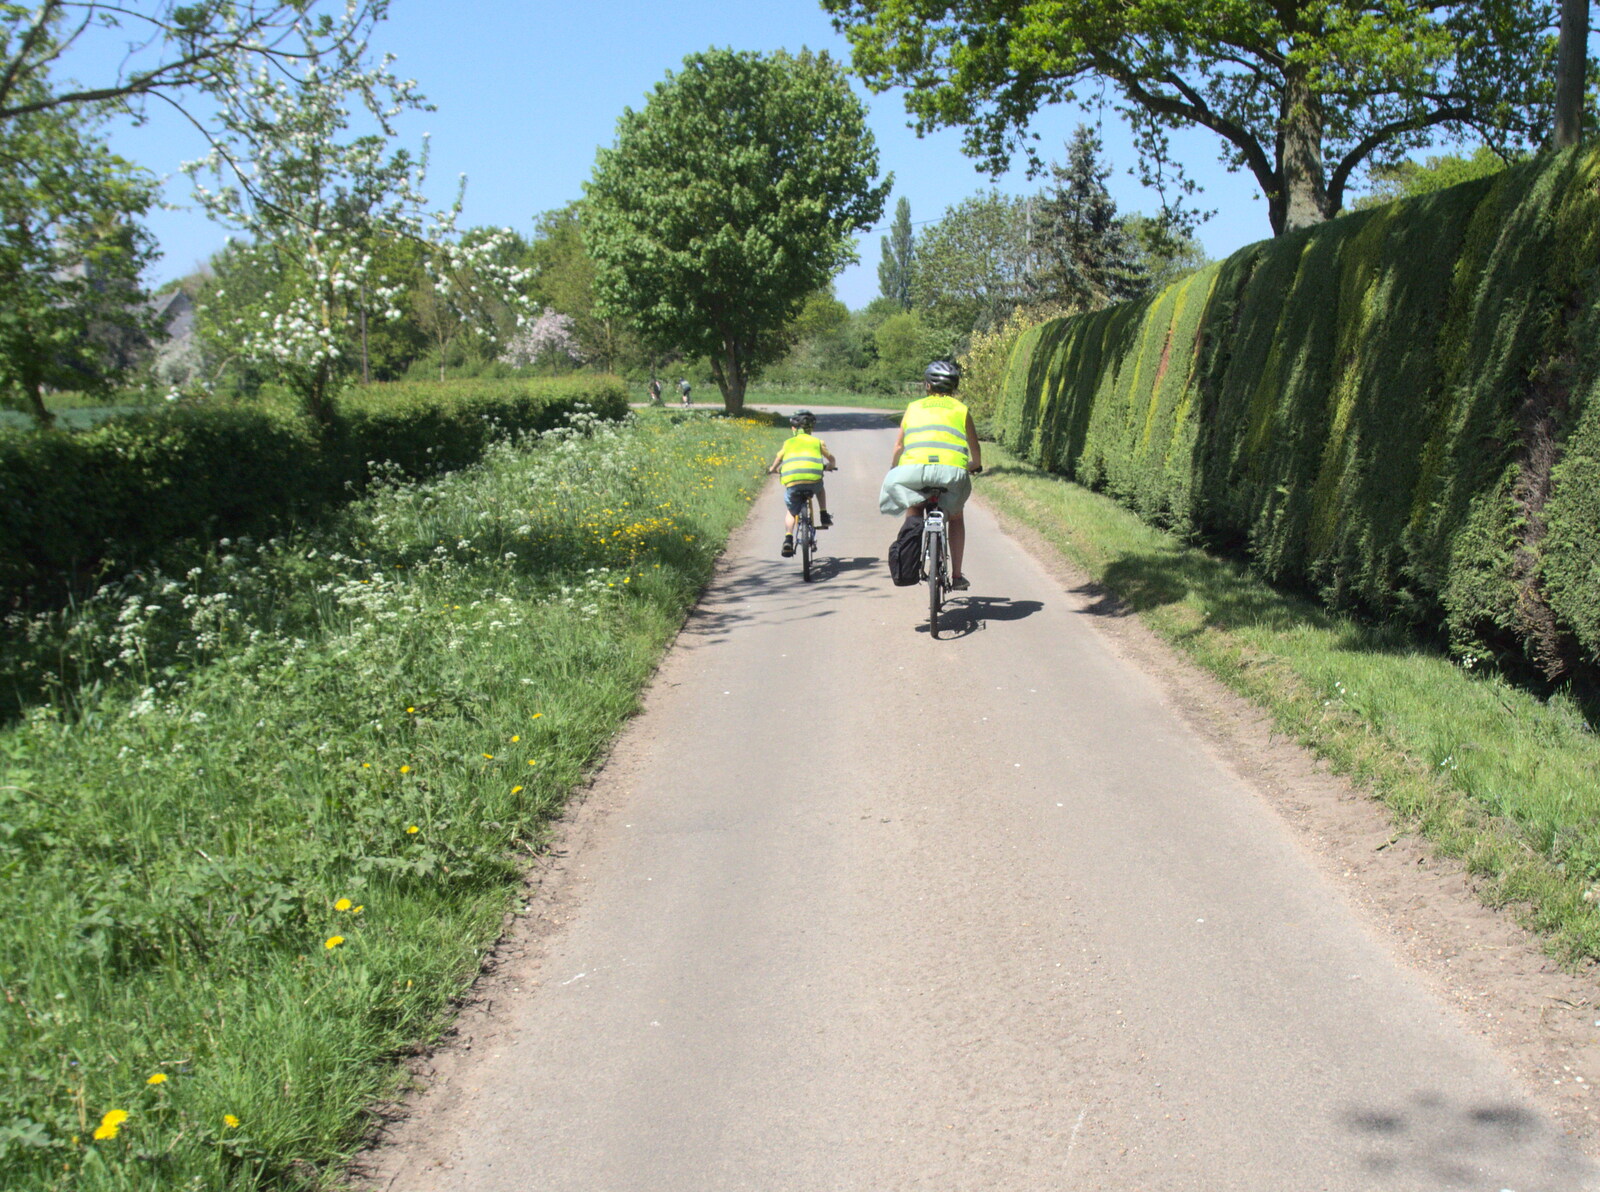 On the road to Thrandeston from A Bike Ride to the Railway Tavern, Mellis, Suffolk - 7th May 2018